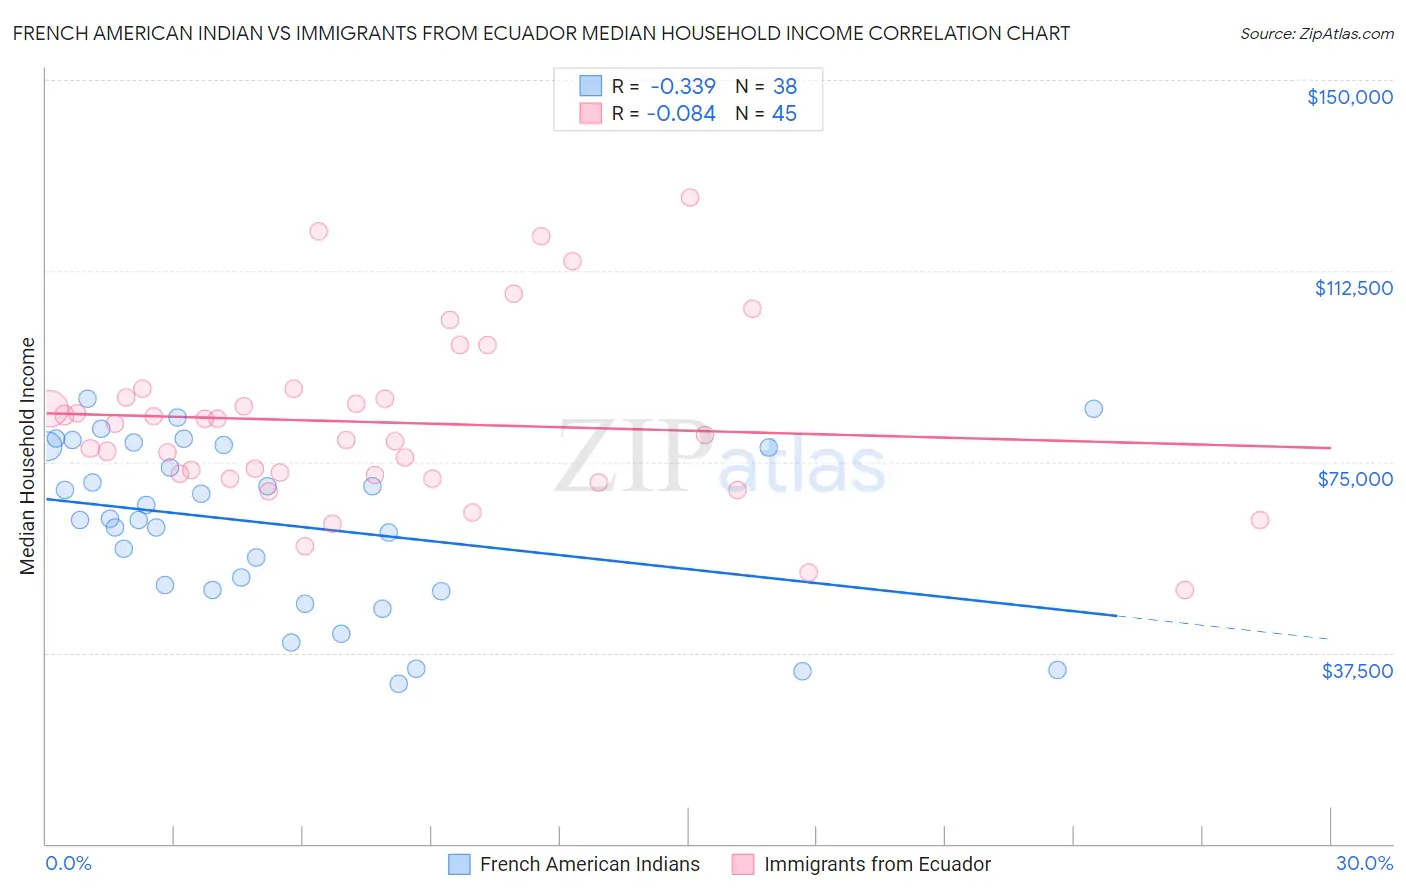 French American Indian vs Immigrants from Ecuador Median Household Income